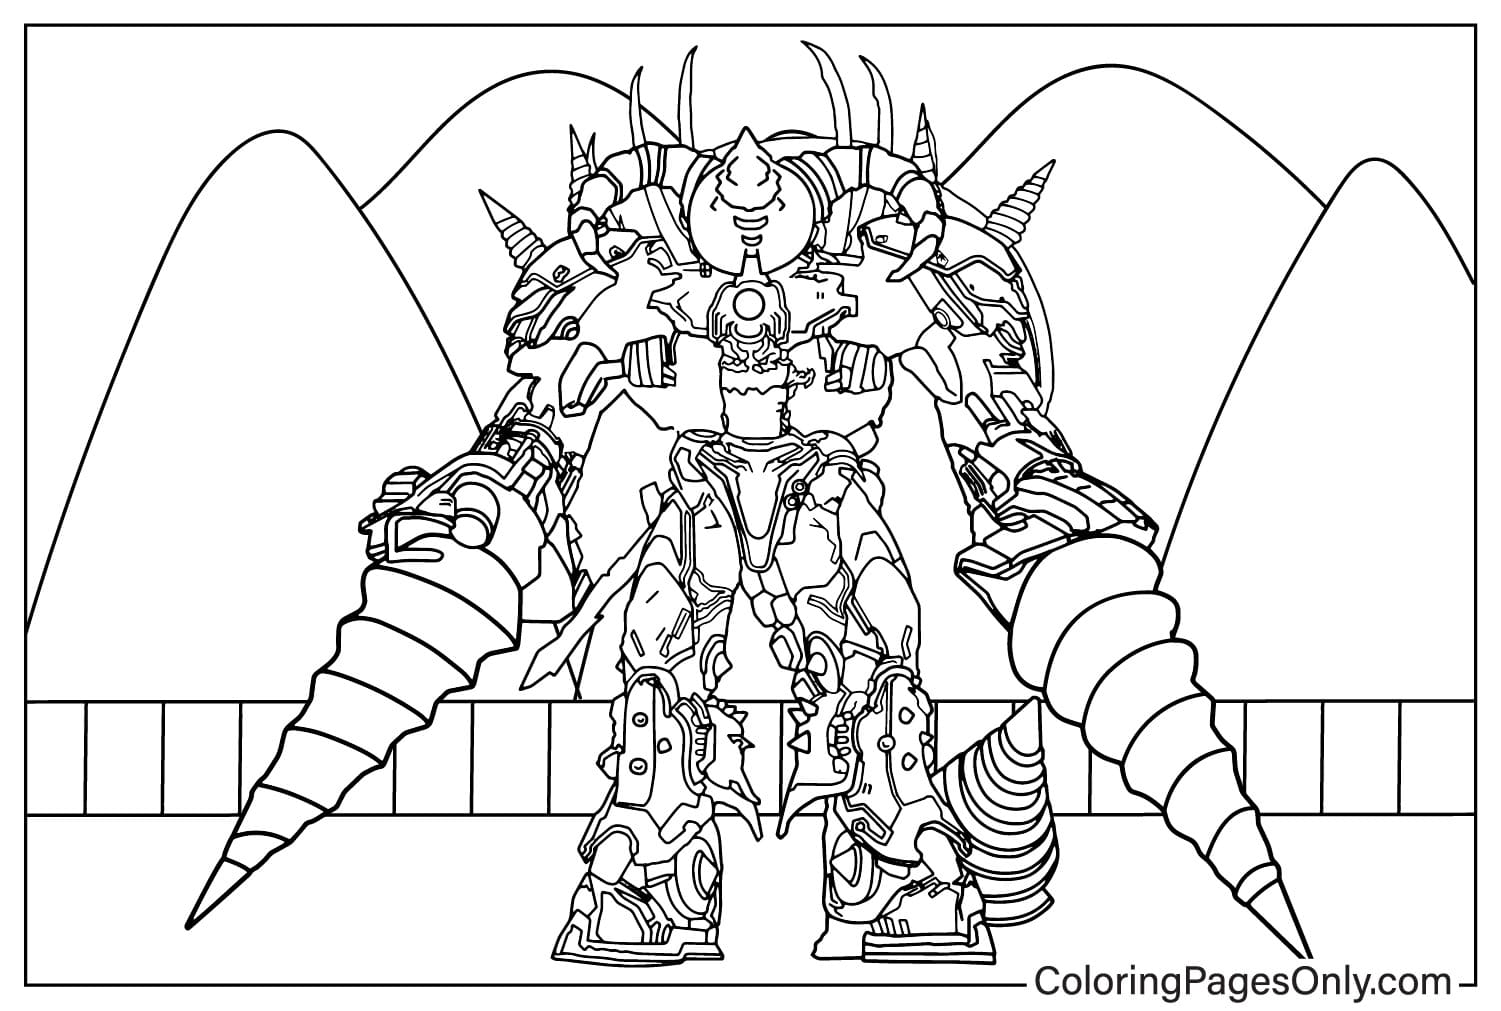 Free Upgraded Titan Drill Man Coloring Page from Upgraded Titan Drill Man